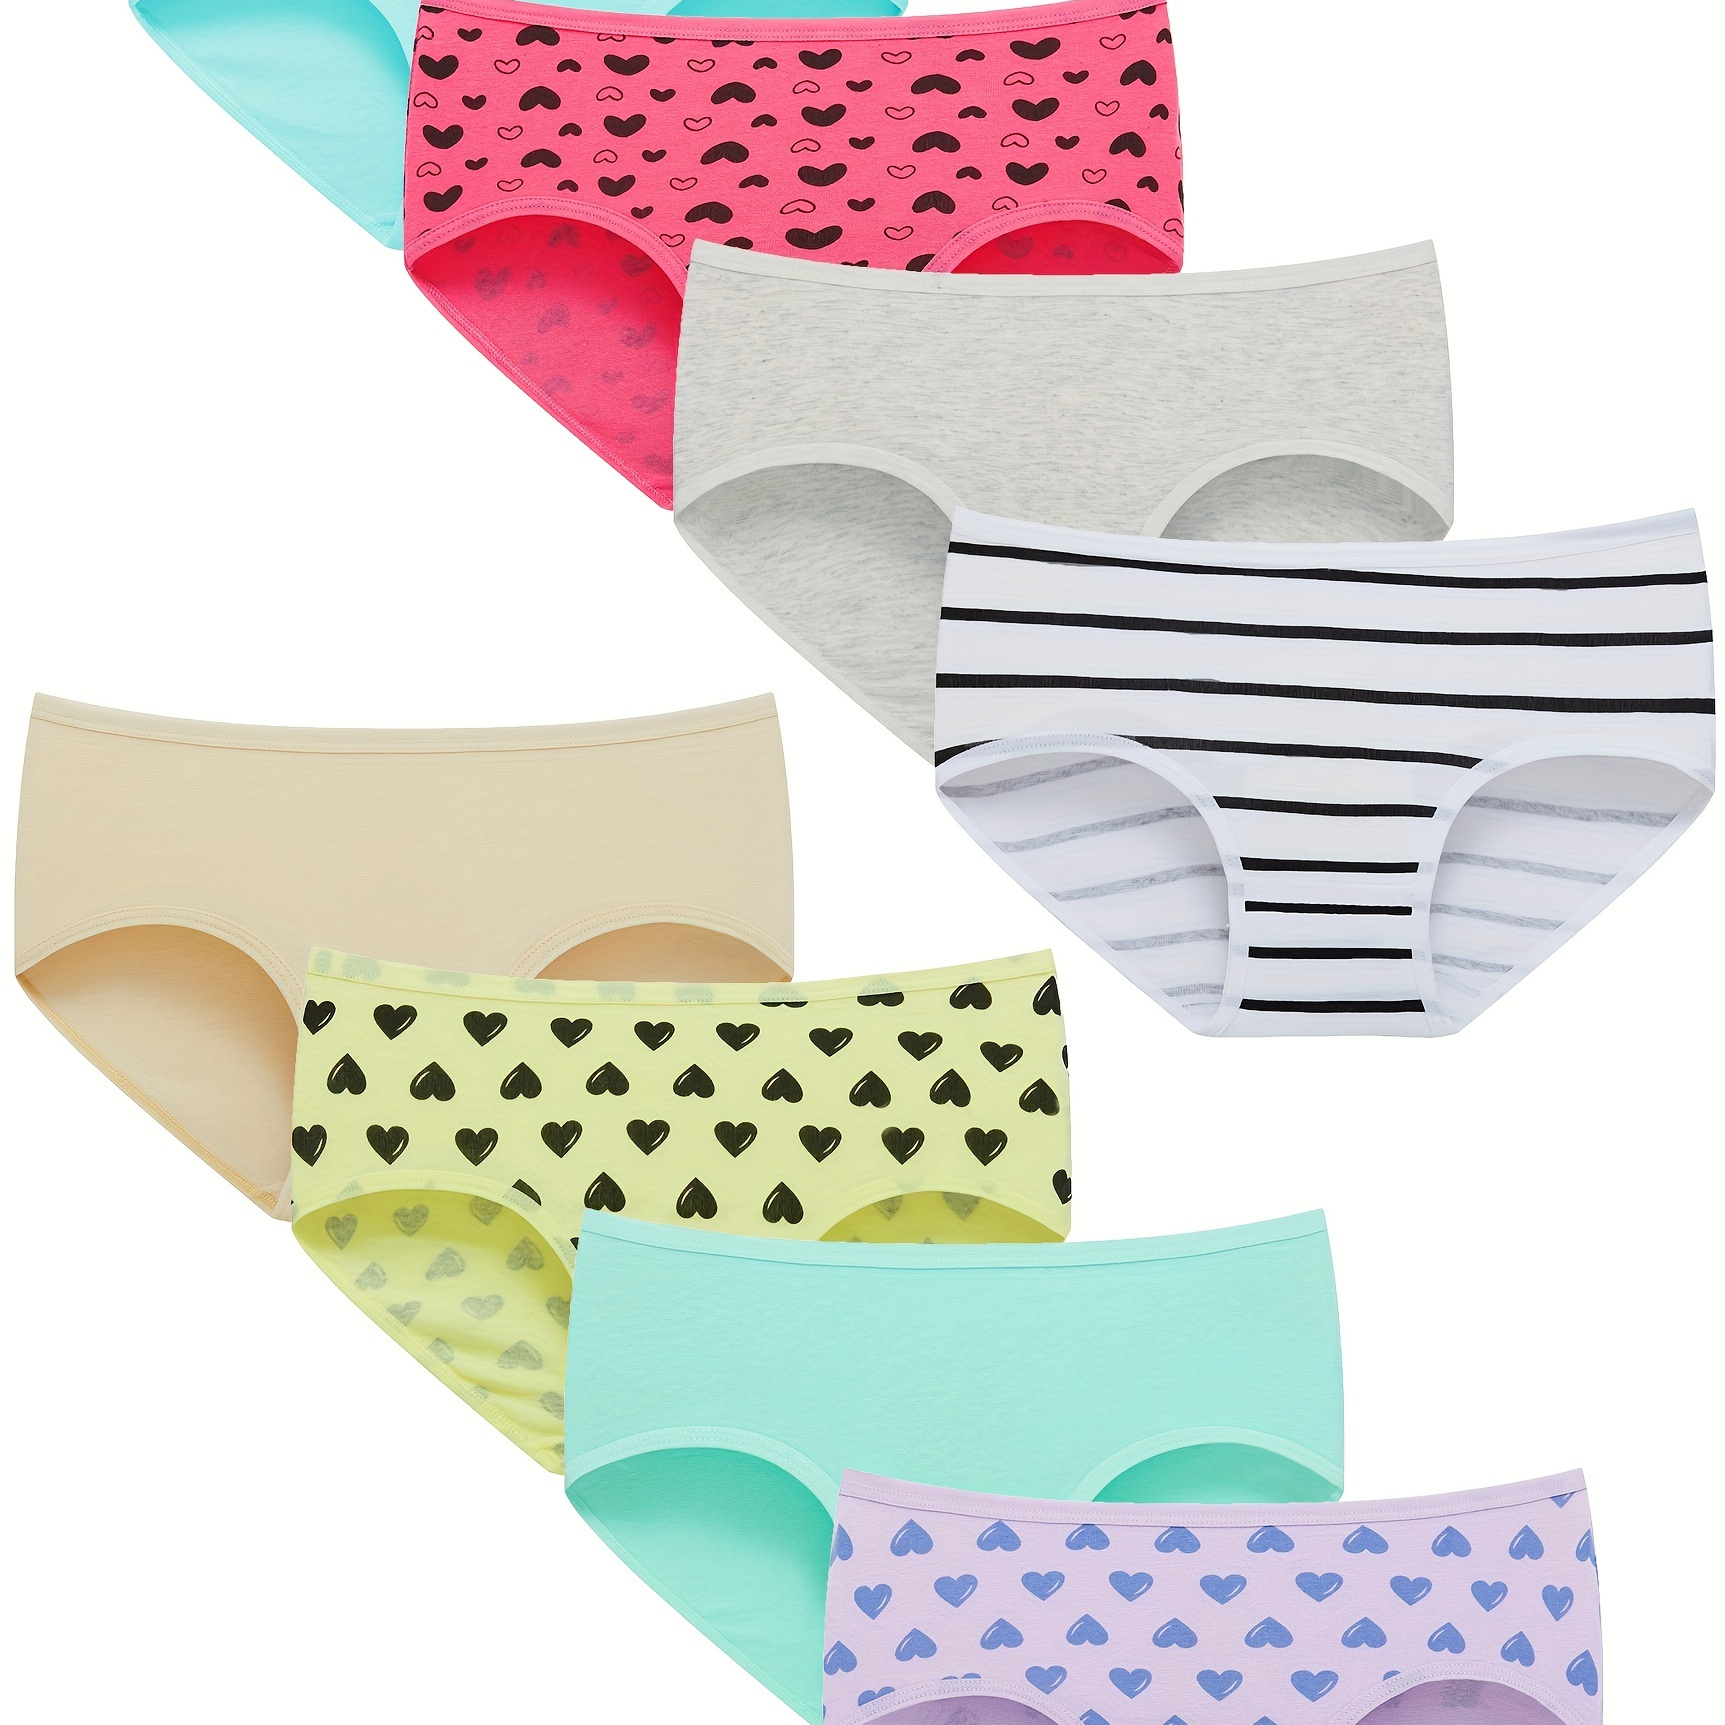  Fruit of the Loom boys Fashion (Pack 5) briefs underwear,  Stripes and Solids, Small US: Briefs Underwear: Clothing, Shoes & Jewelry